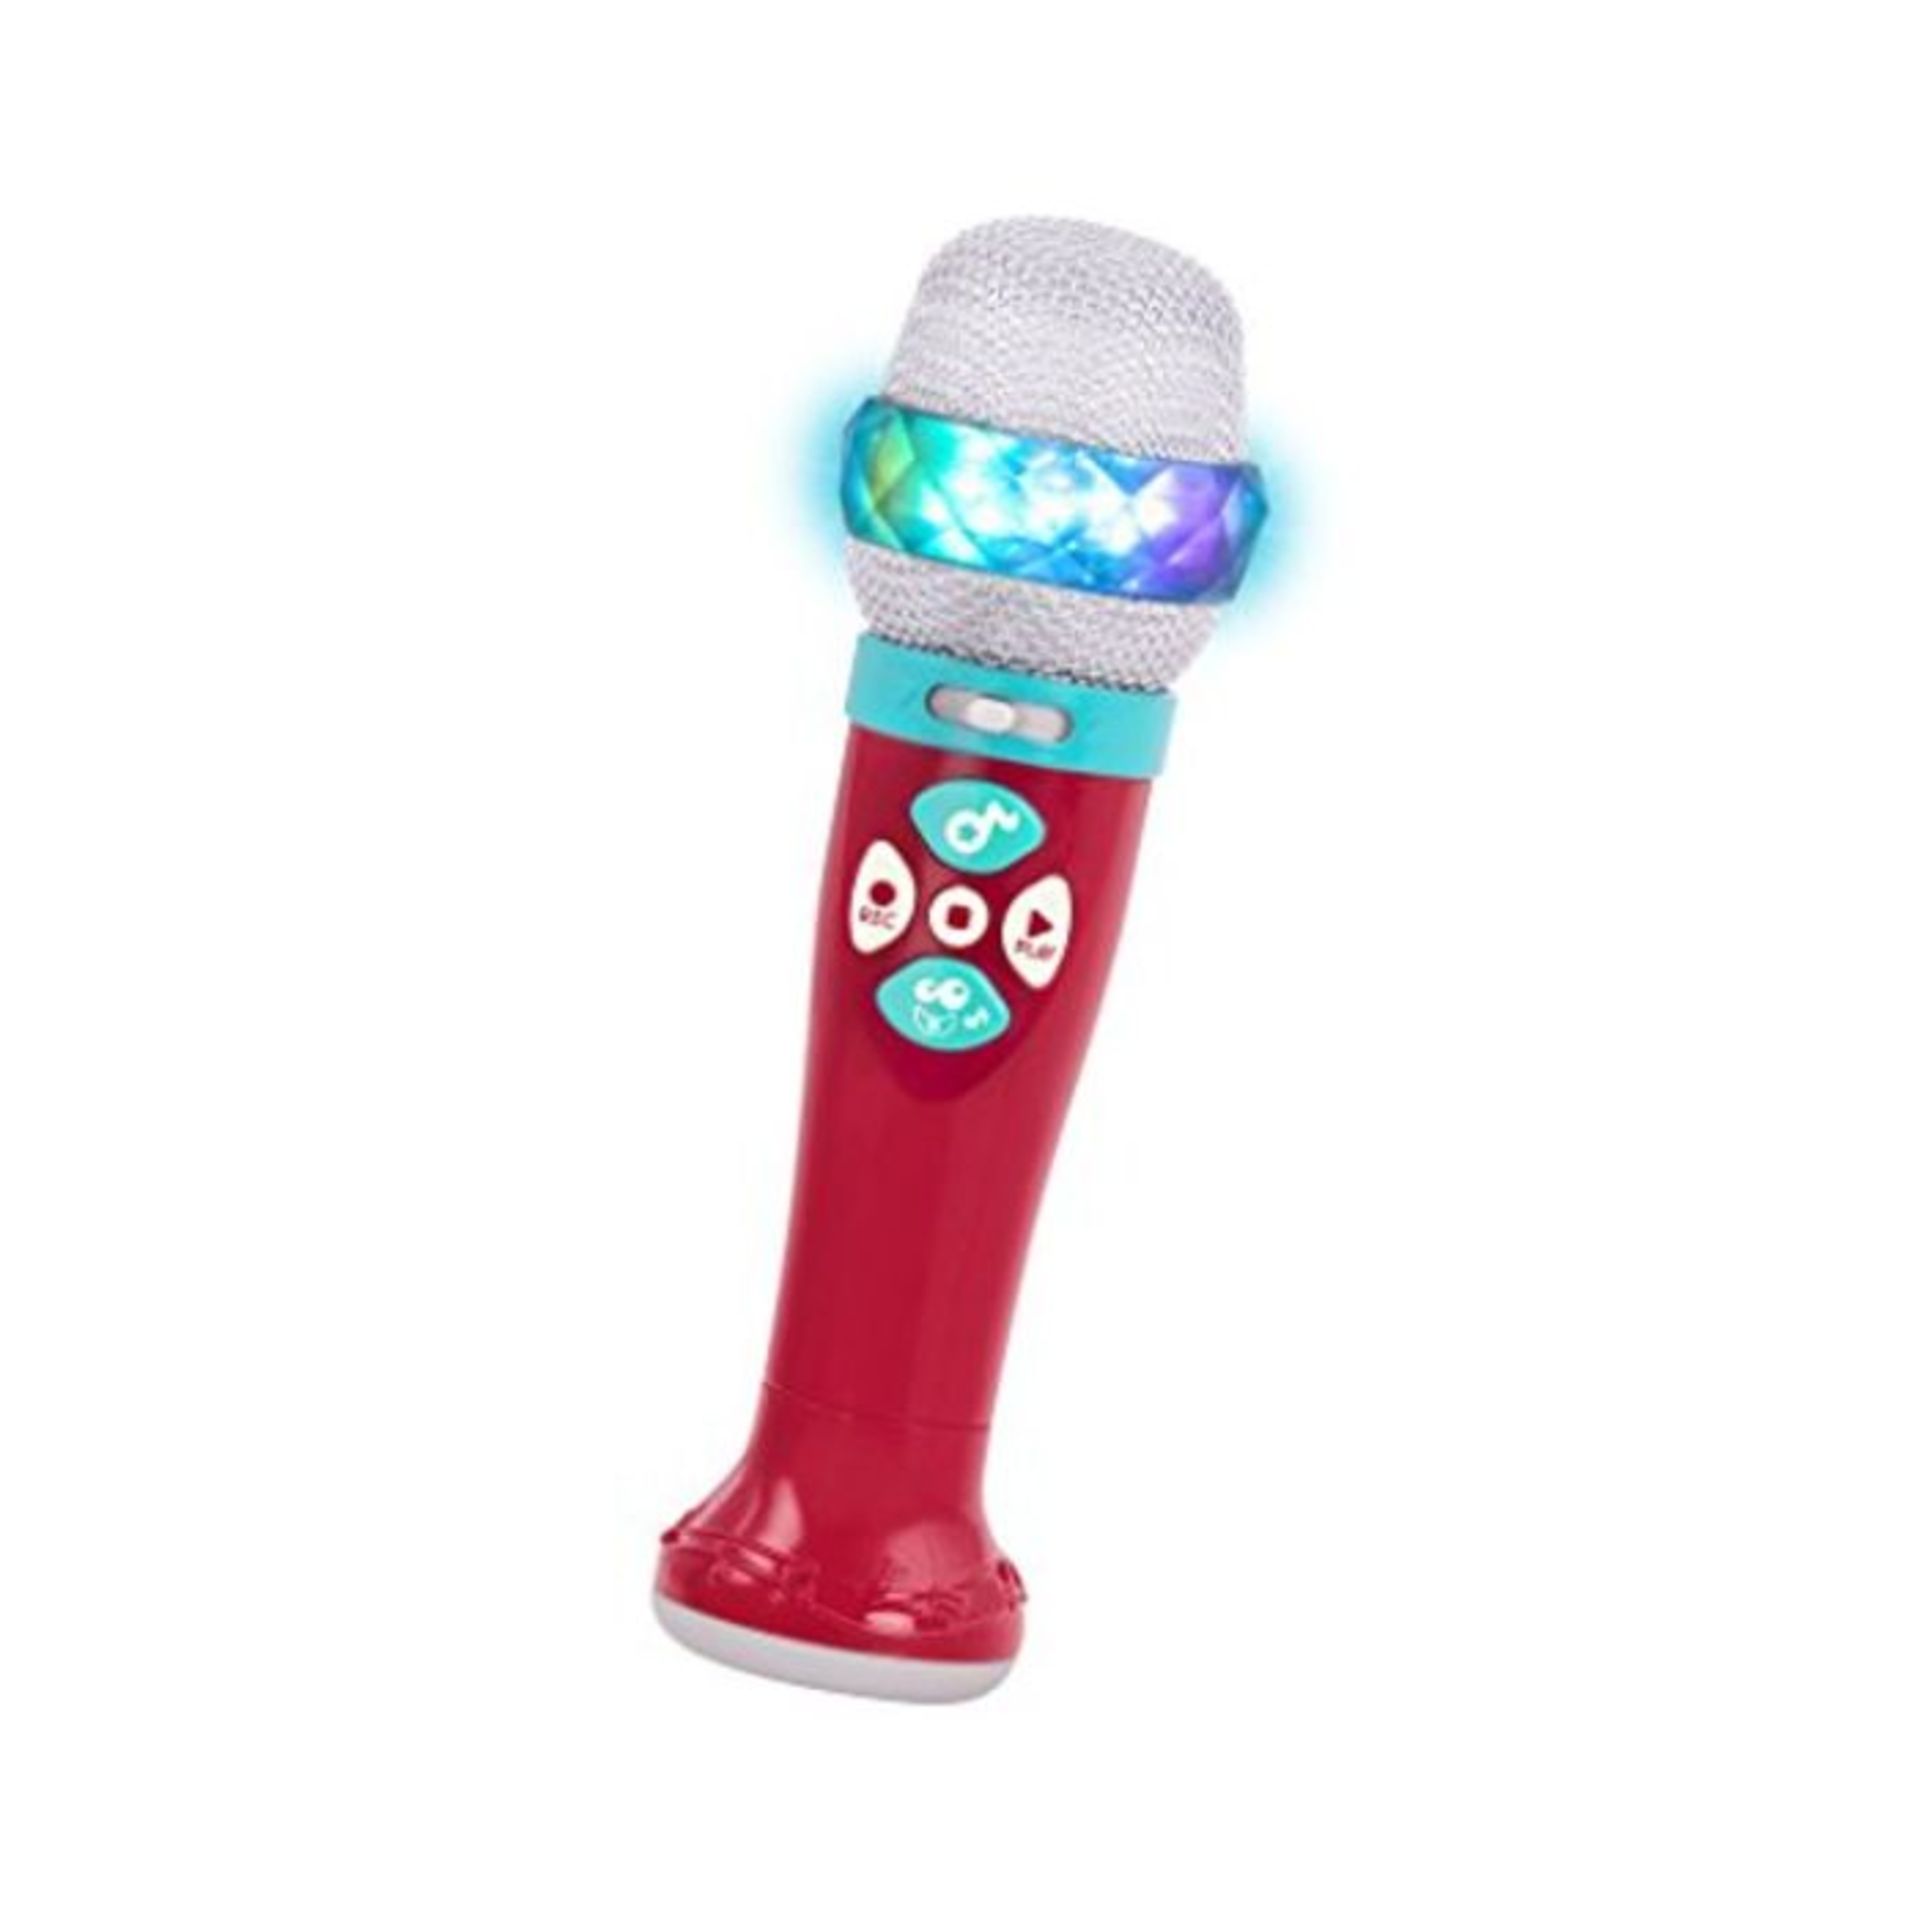 Battat - Musical Light Show Microphone - Light-Up Sing-Along Mic with 5 Songs and Reco